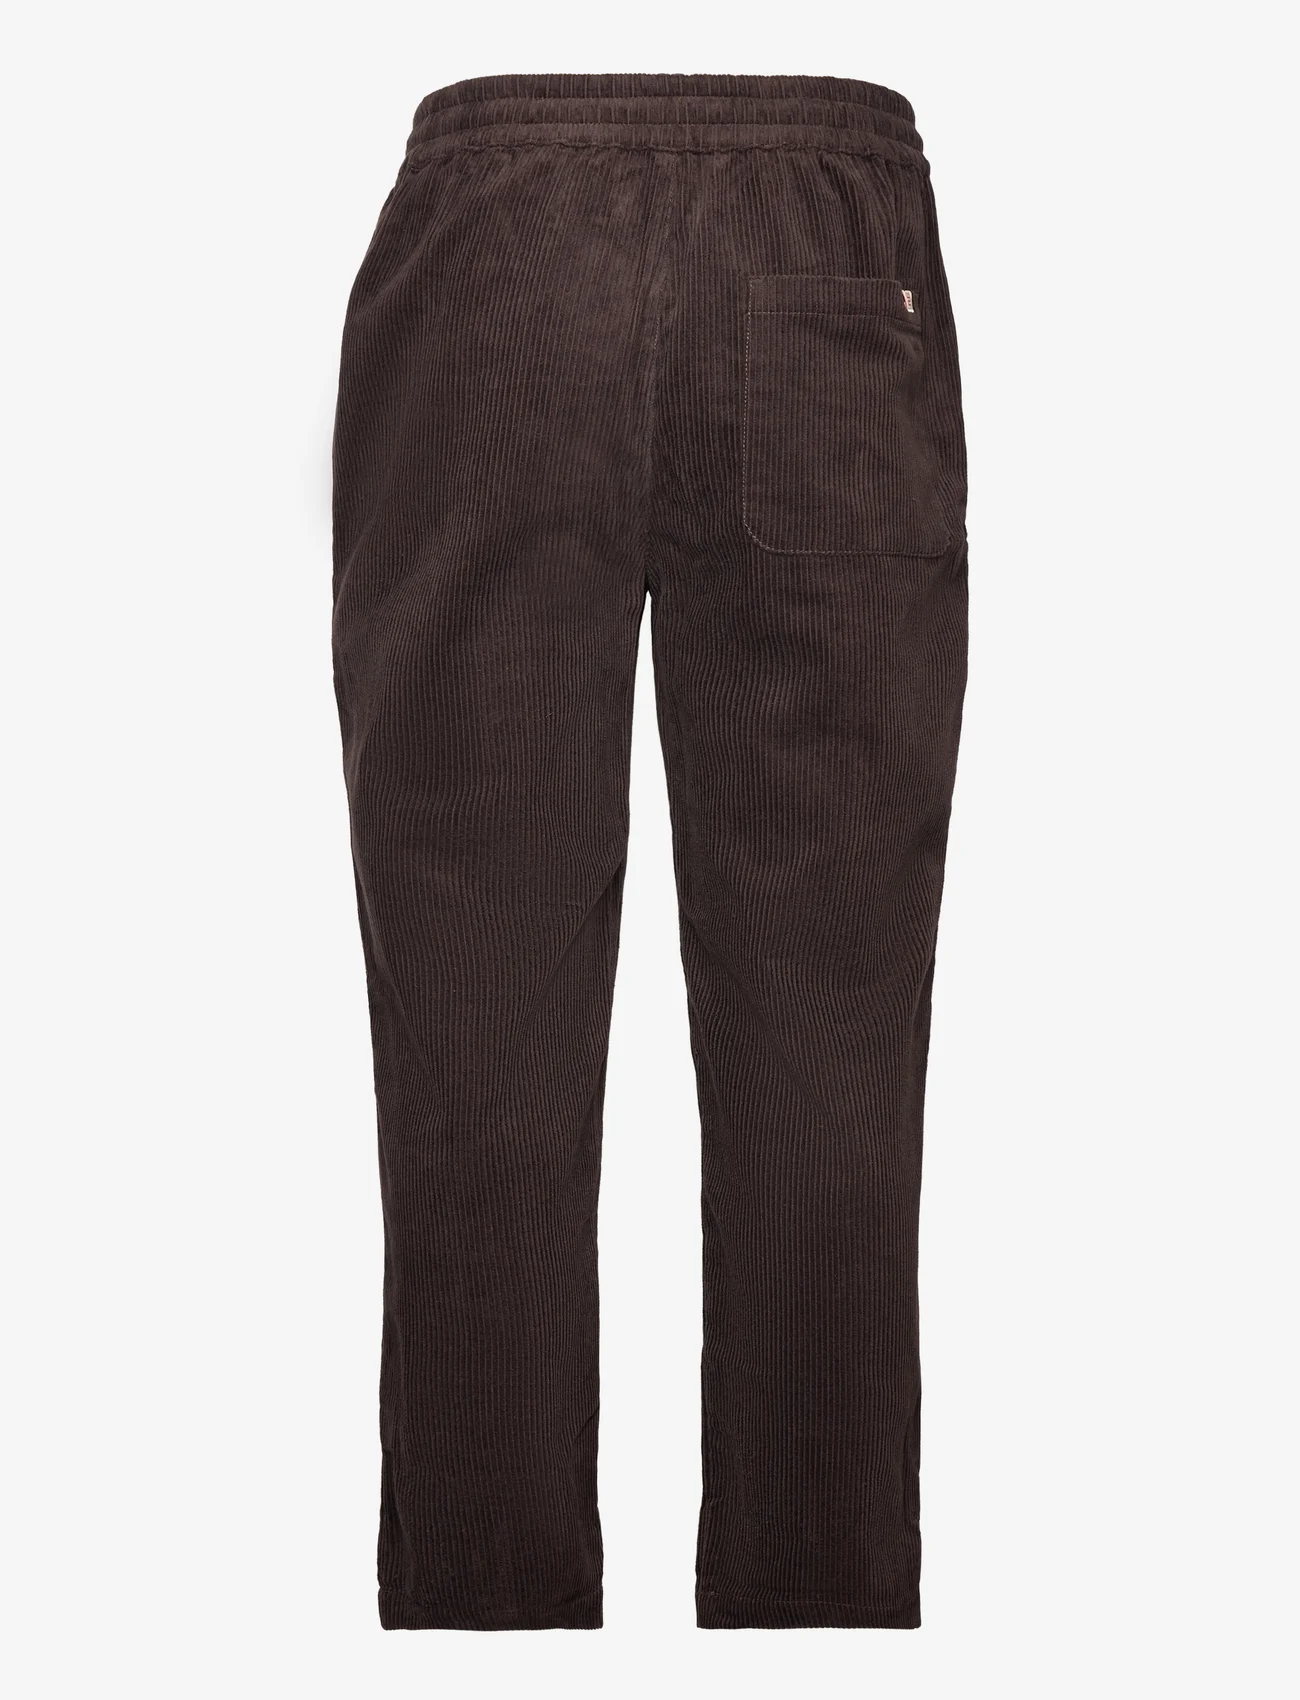 Revolution - Casual Trousers - casual byxor - darkbrown - 1